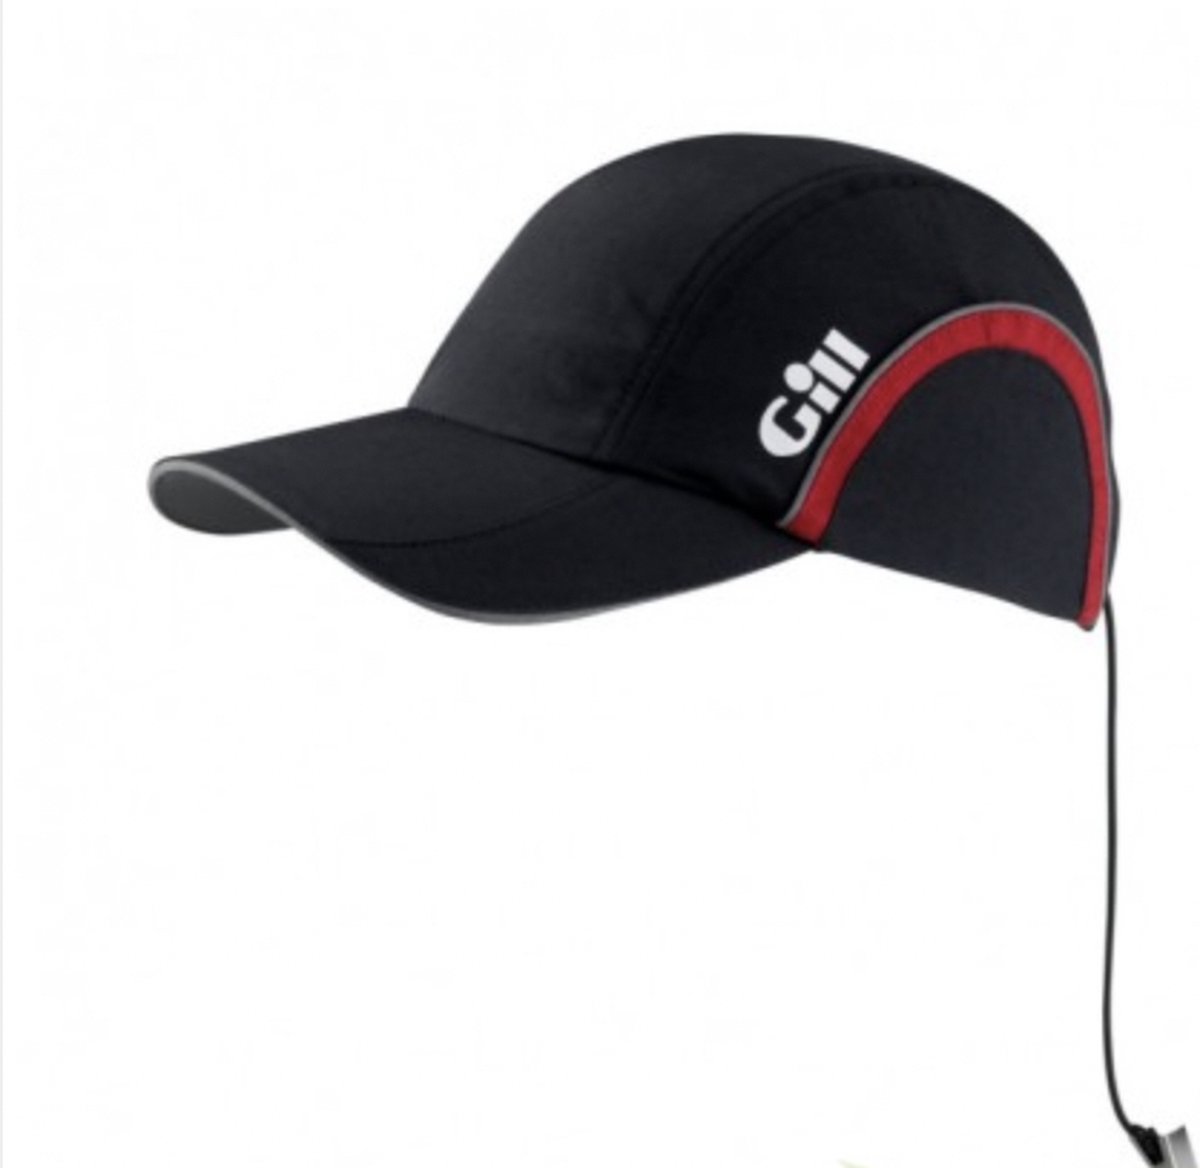 Gill Pro Cap 1 size pet 135 graphite red